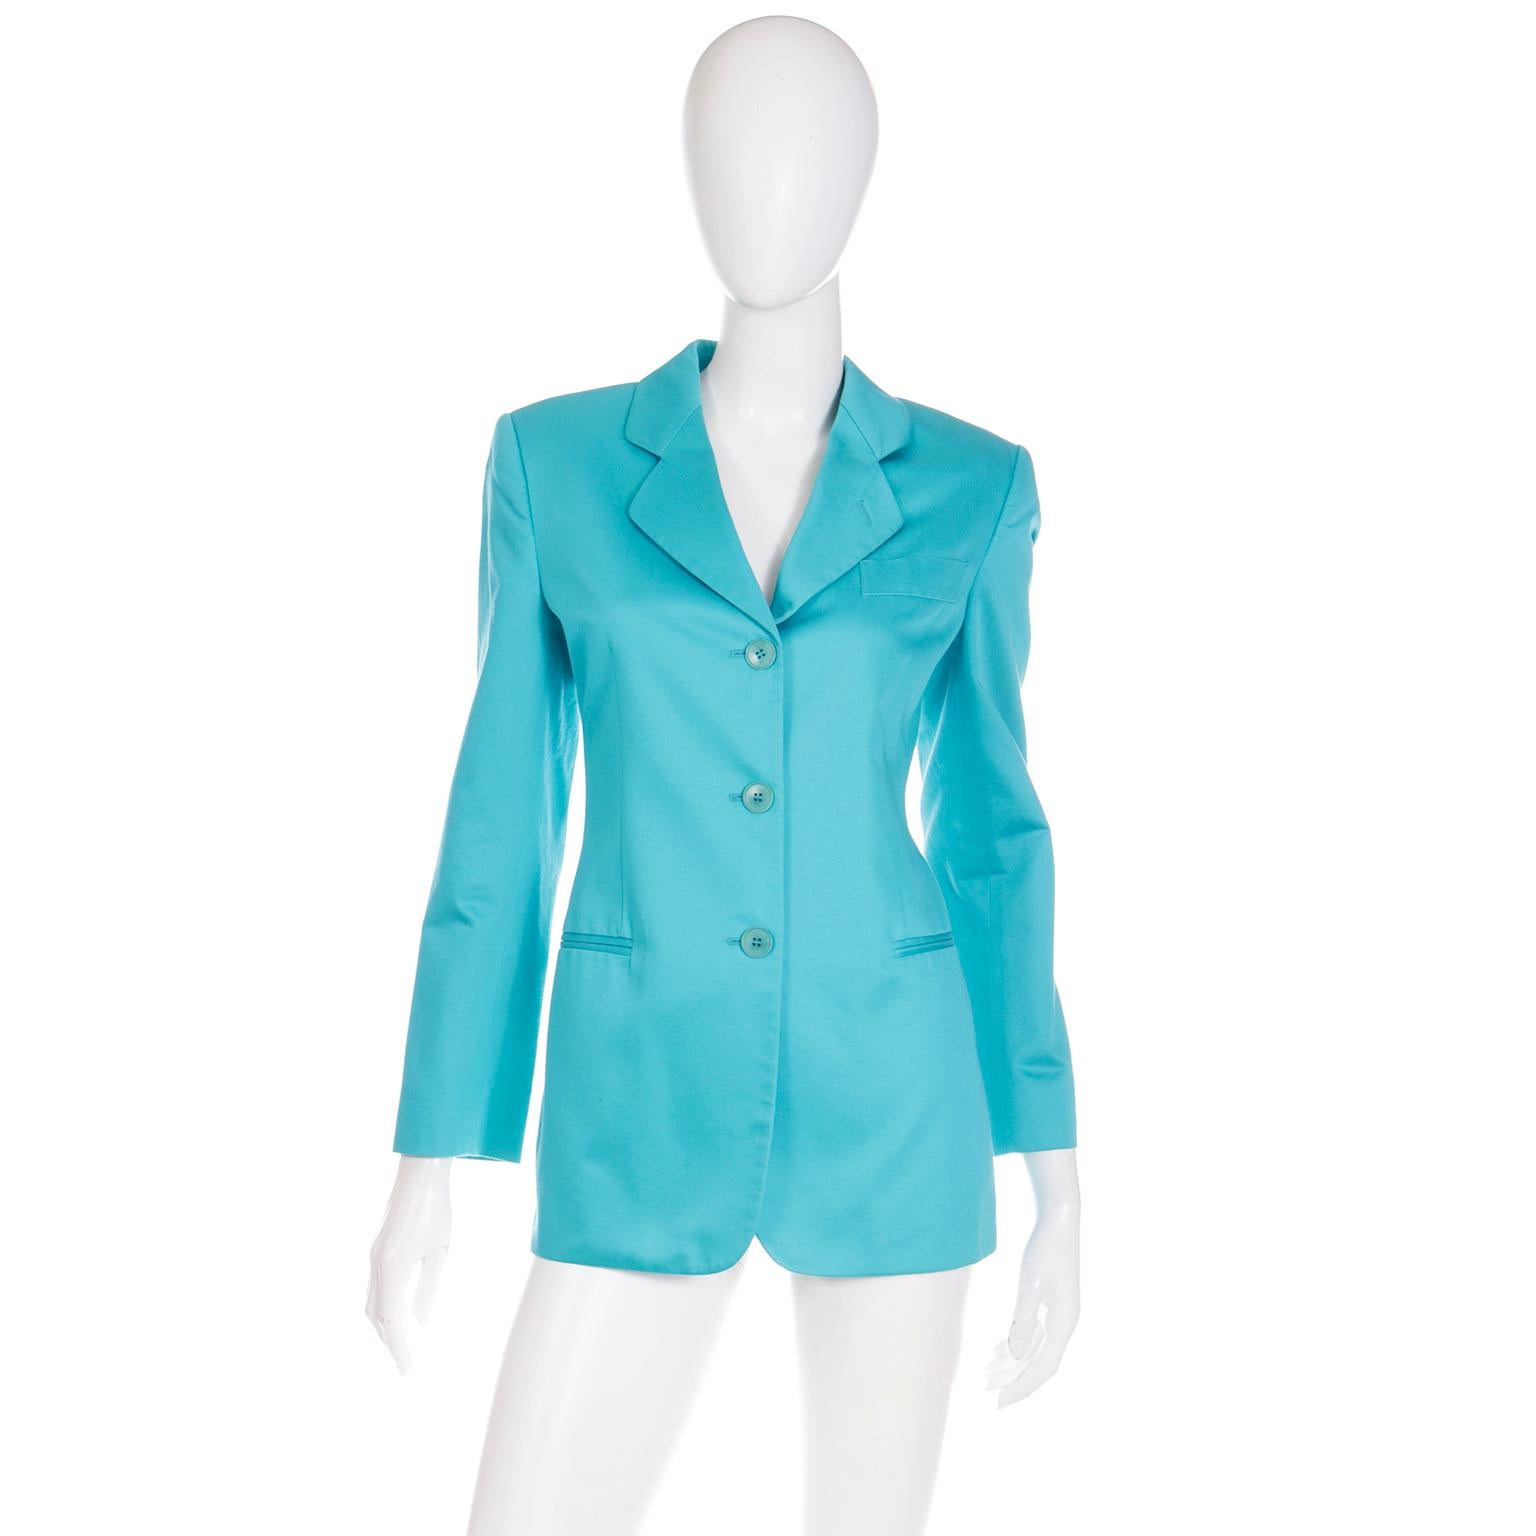 This lovely vintage Giorgio Armani Le Collezioni aqua blue blazer style jacket is so versatile and easy to wear. The longline jacket buttons in front and a has a notched lapel. Designed with Armani's signature clean lines in a minimalist and